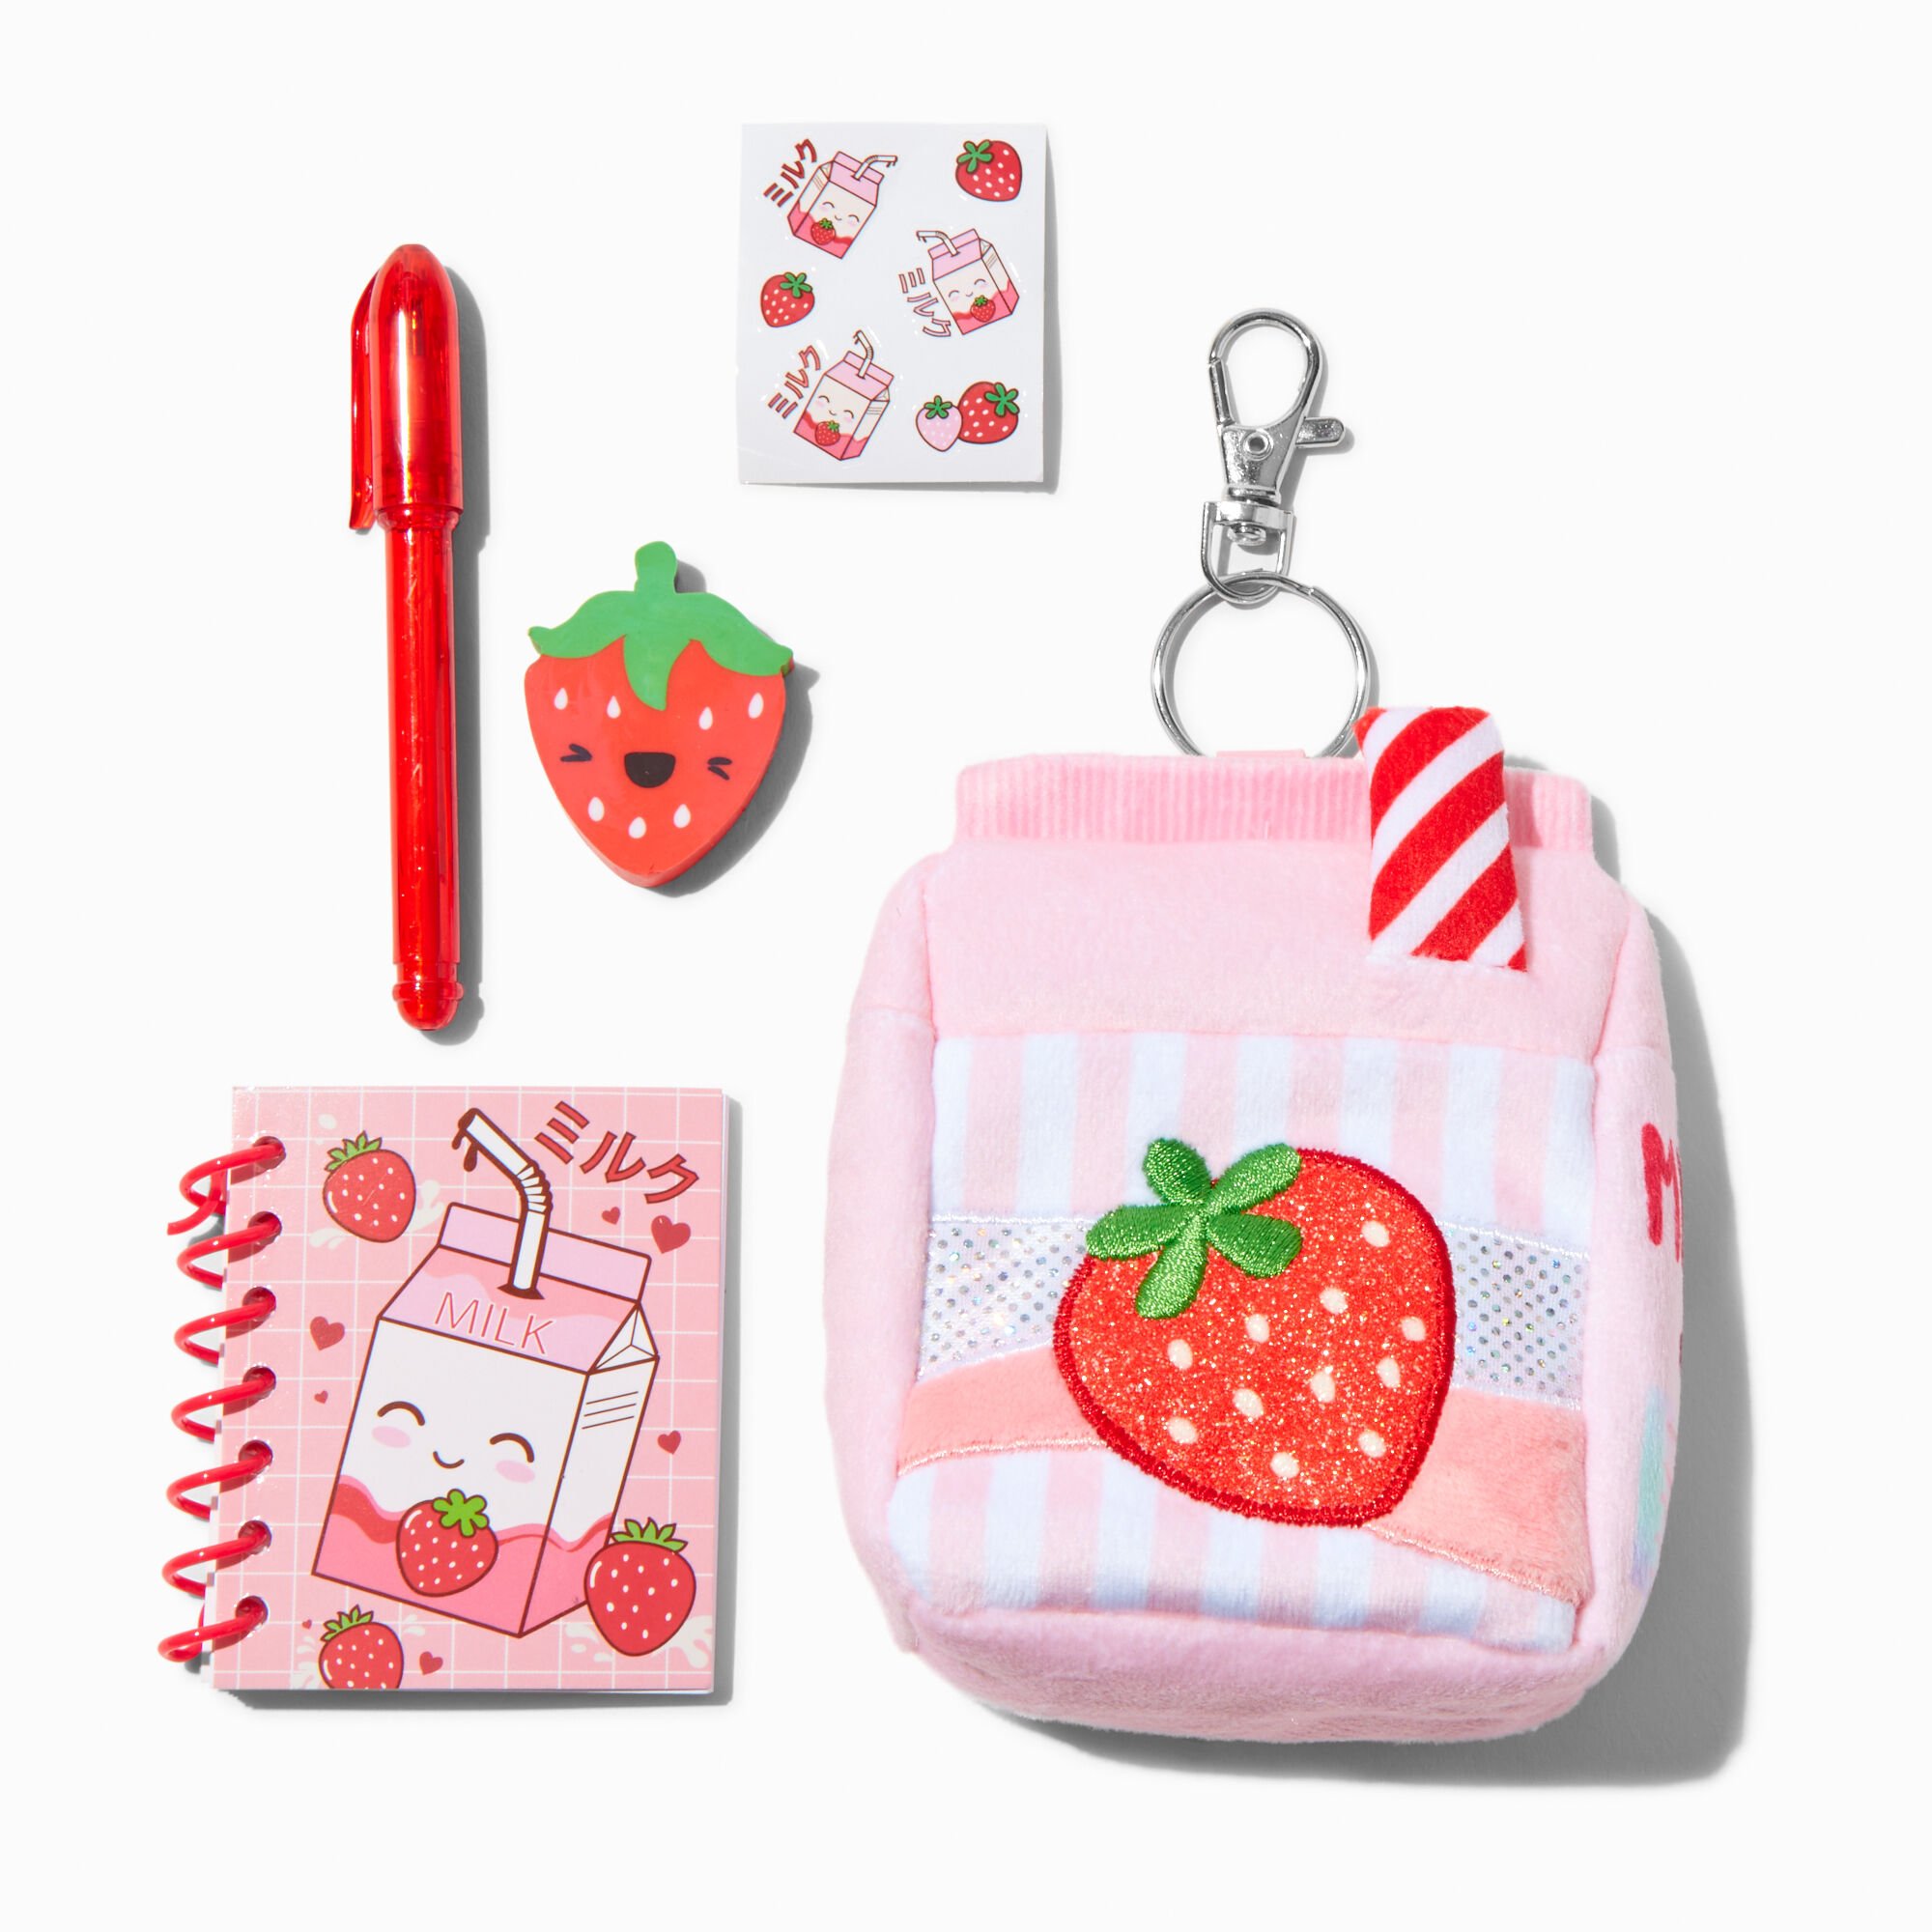 View Claires Strawberry Milk 4 Backpack Stationery Set information